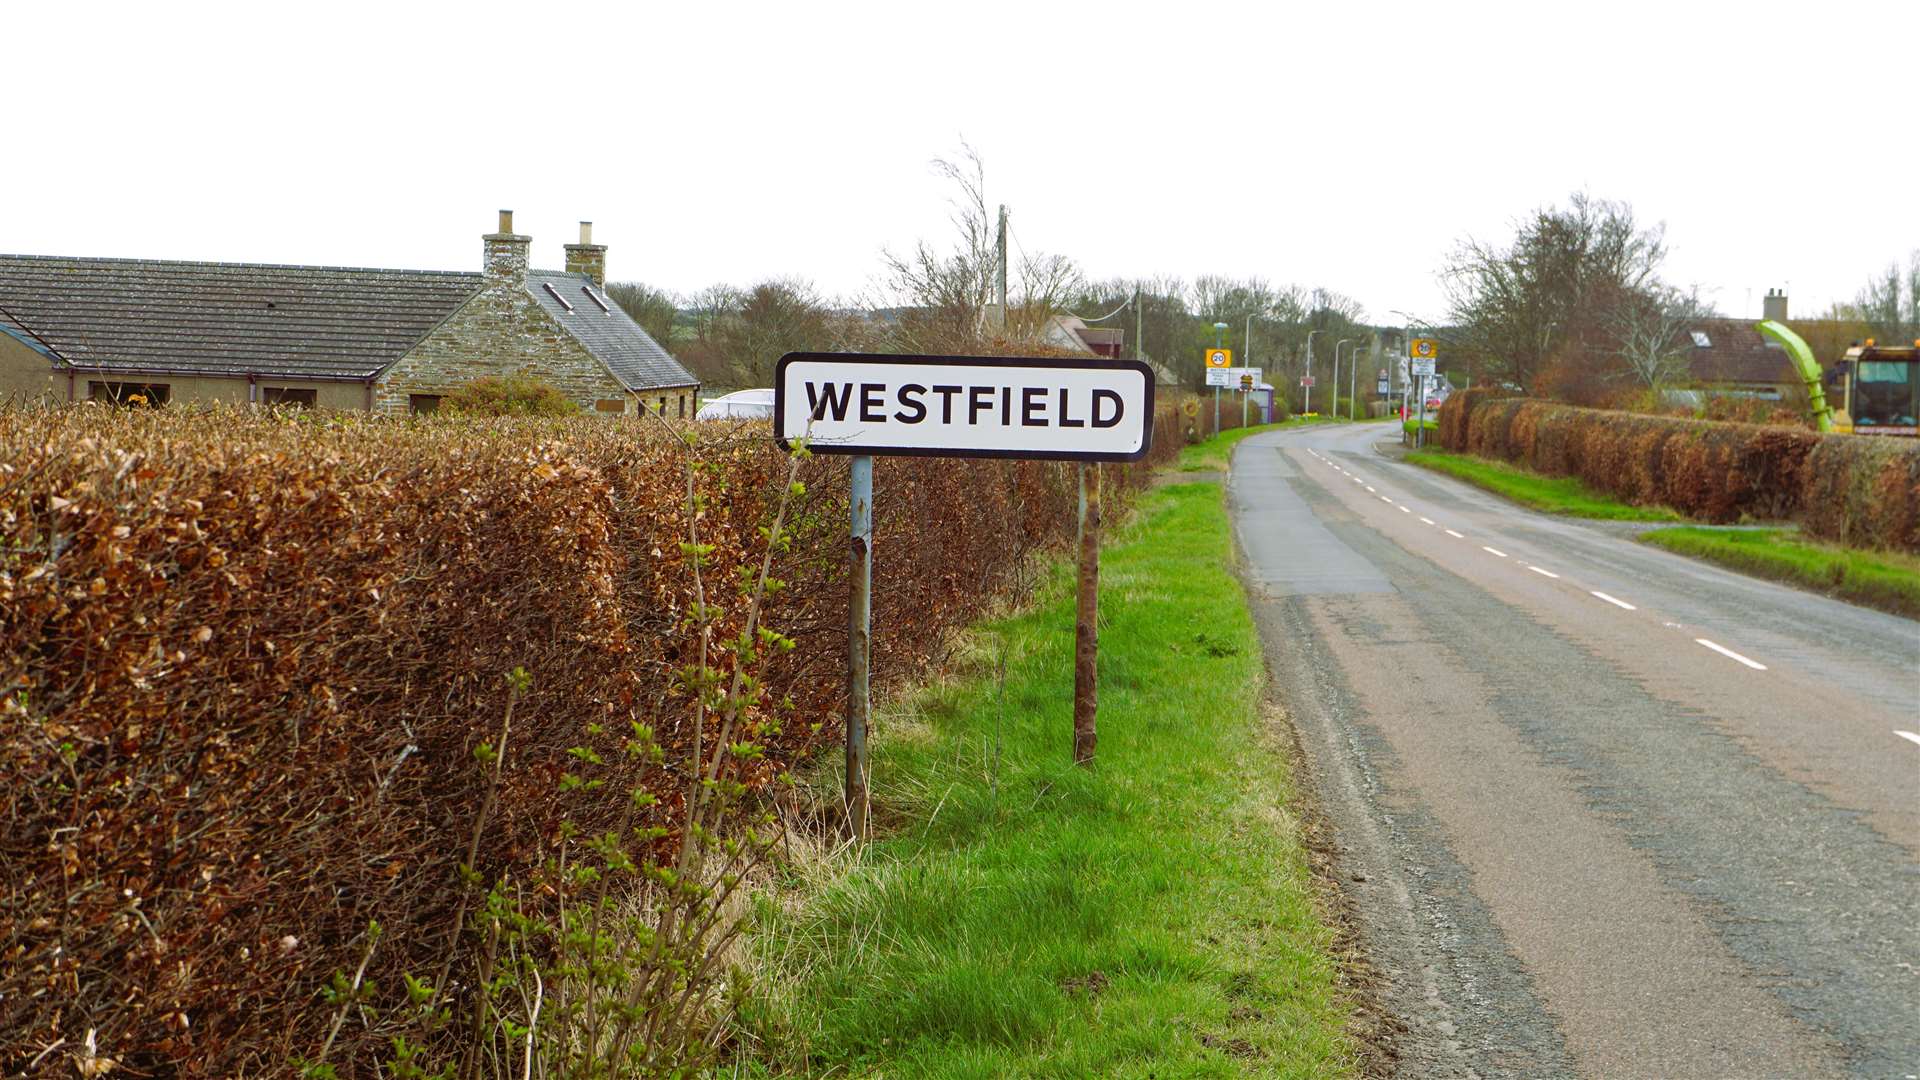 Watten became Westfield over the weekend thanks to a joker changing the sign. Picture: DGS